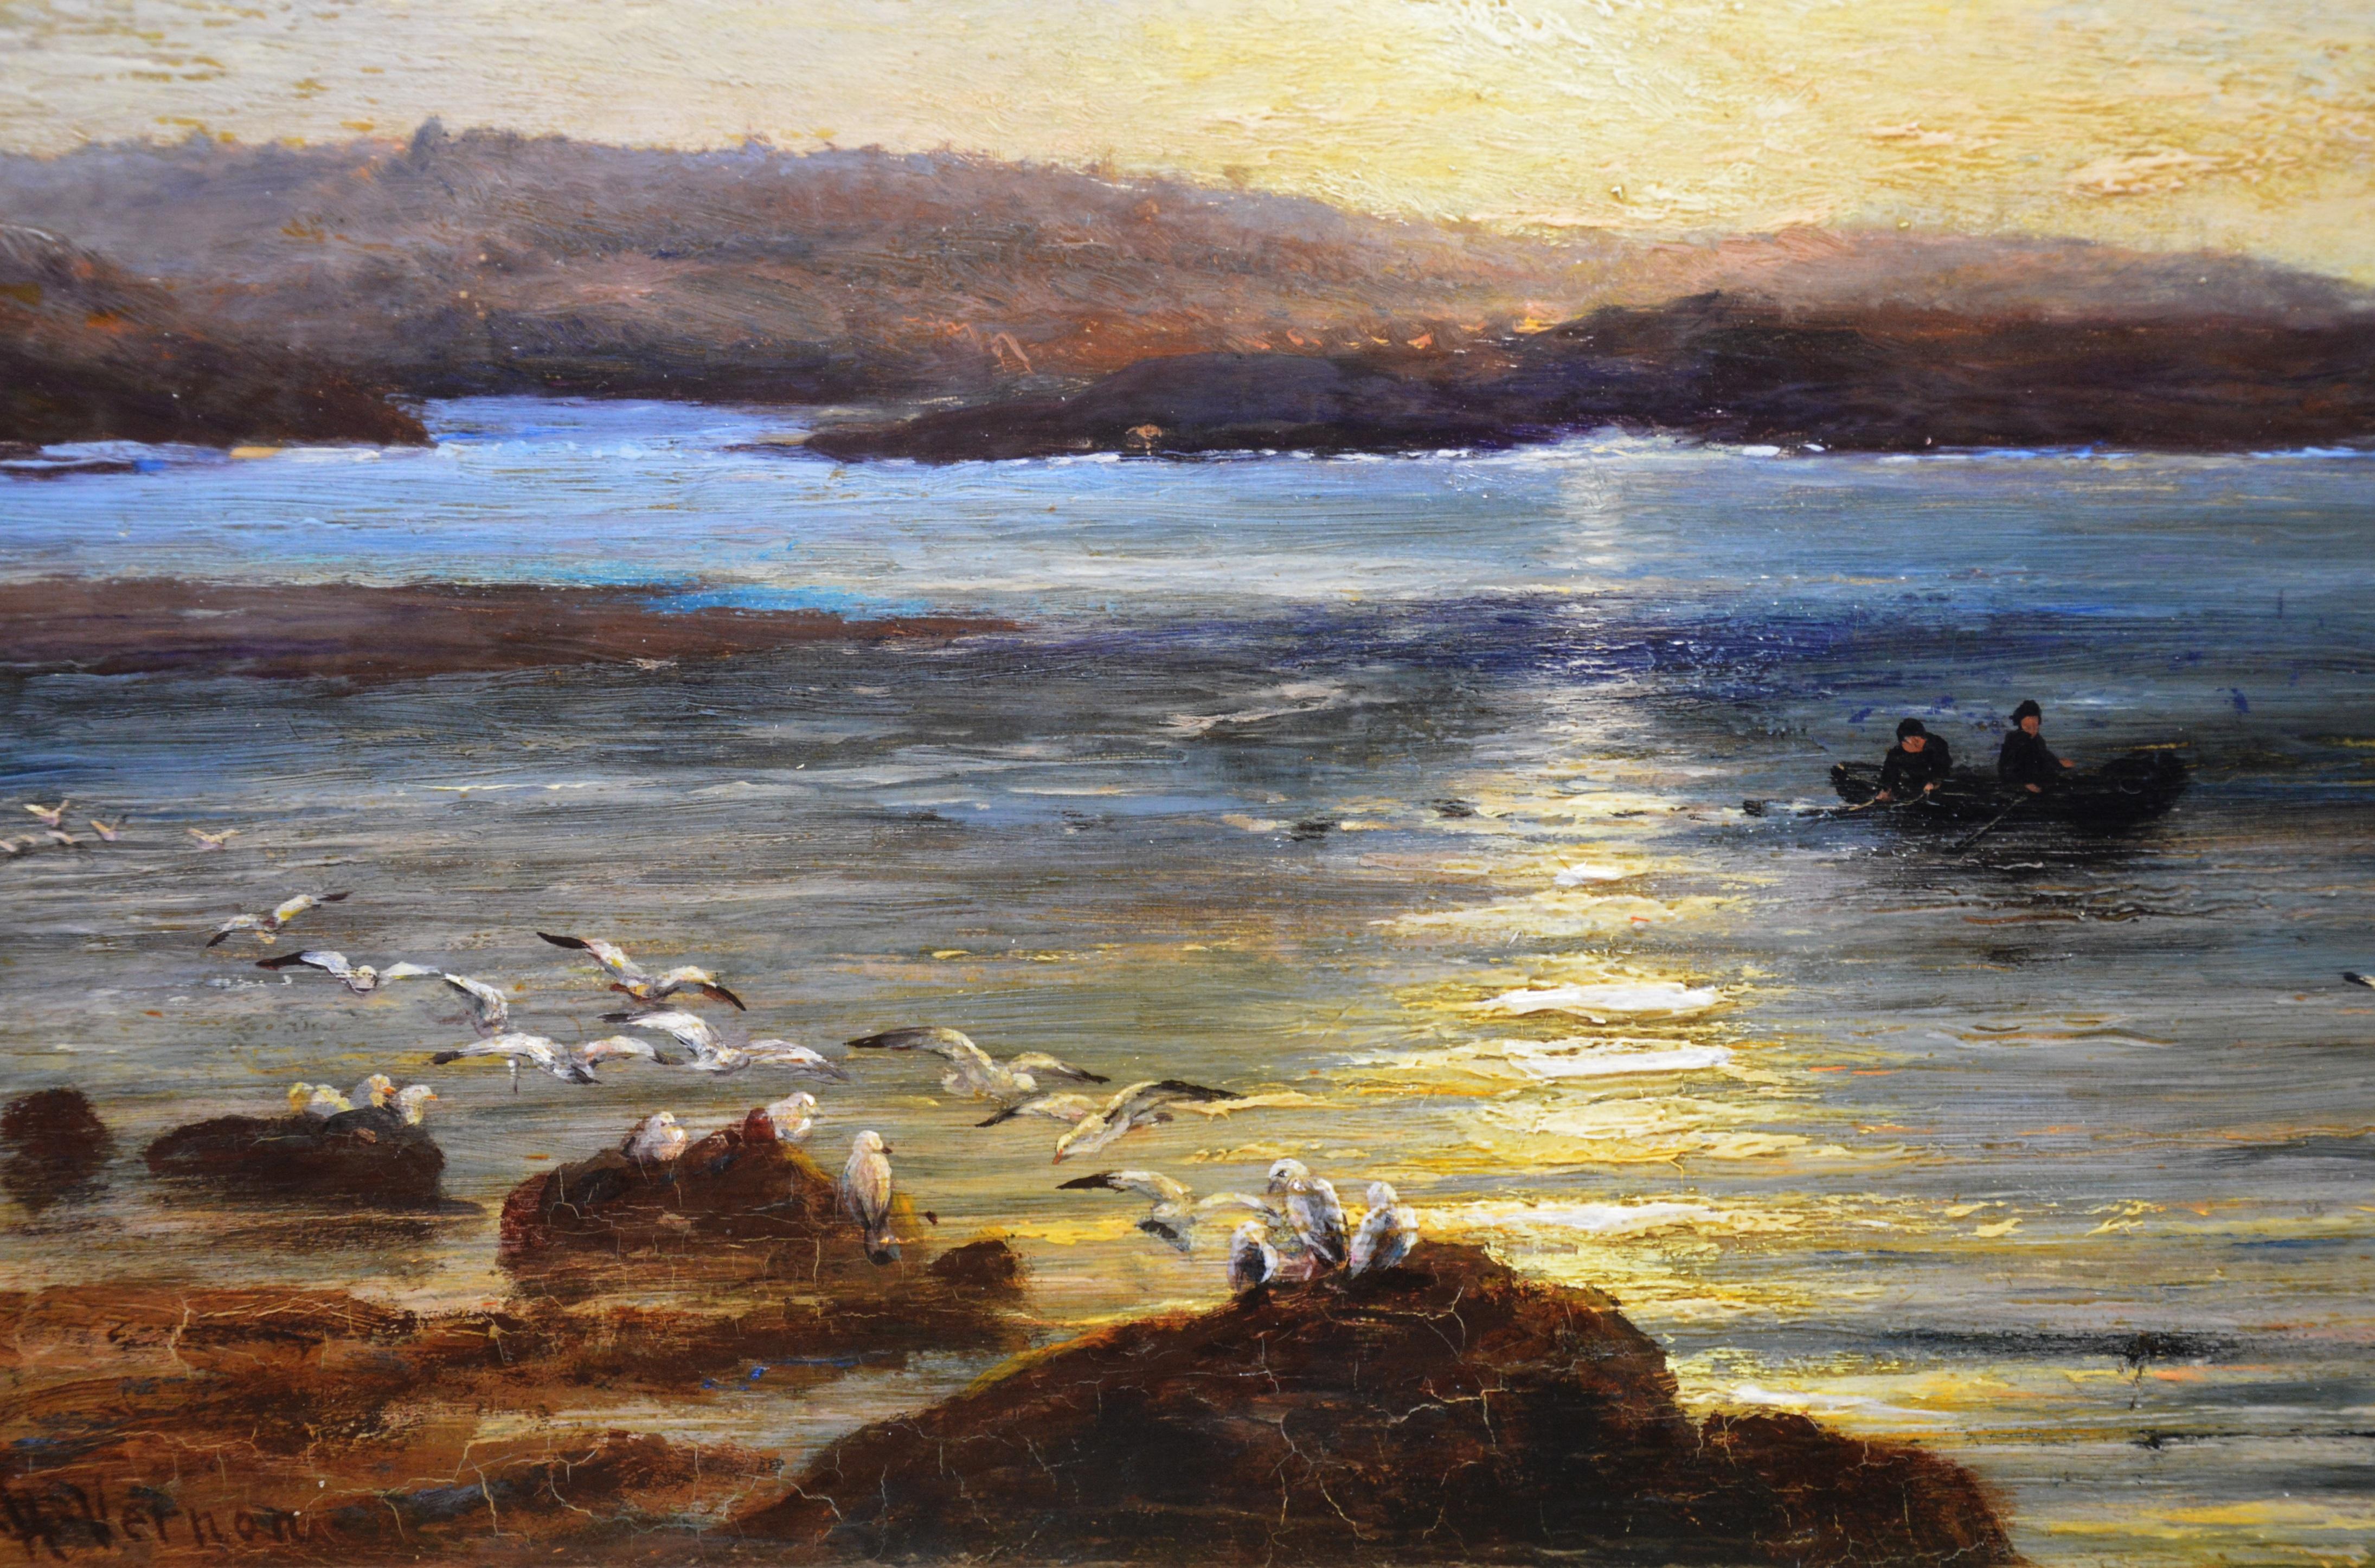 Sunset, Caernarfon Bay - 19th Century Oil Painting North Wales Coastal Landscape - Brown Landscape Painting by Unknown